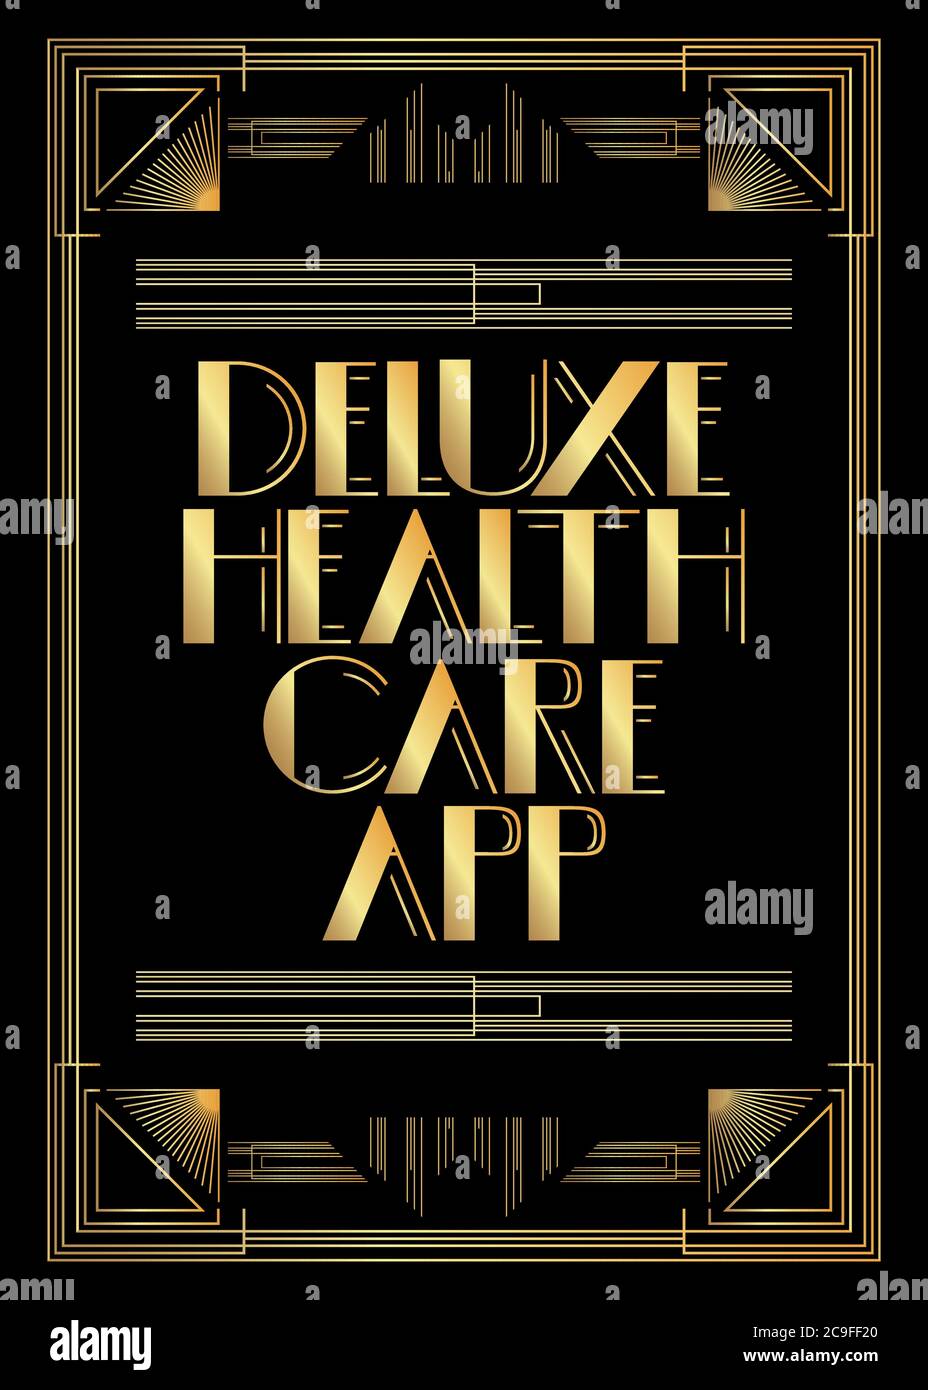 Art Deco Retro Deluxe Health Care App text. Decorative greeting card, sign with vintage letters. Stock Vector